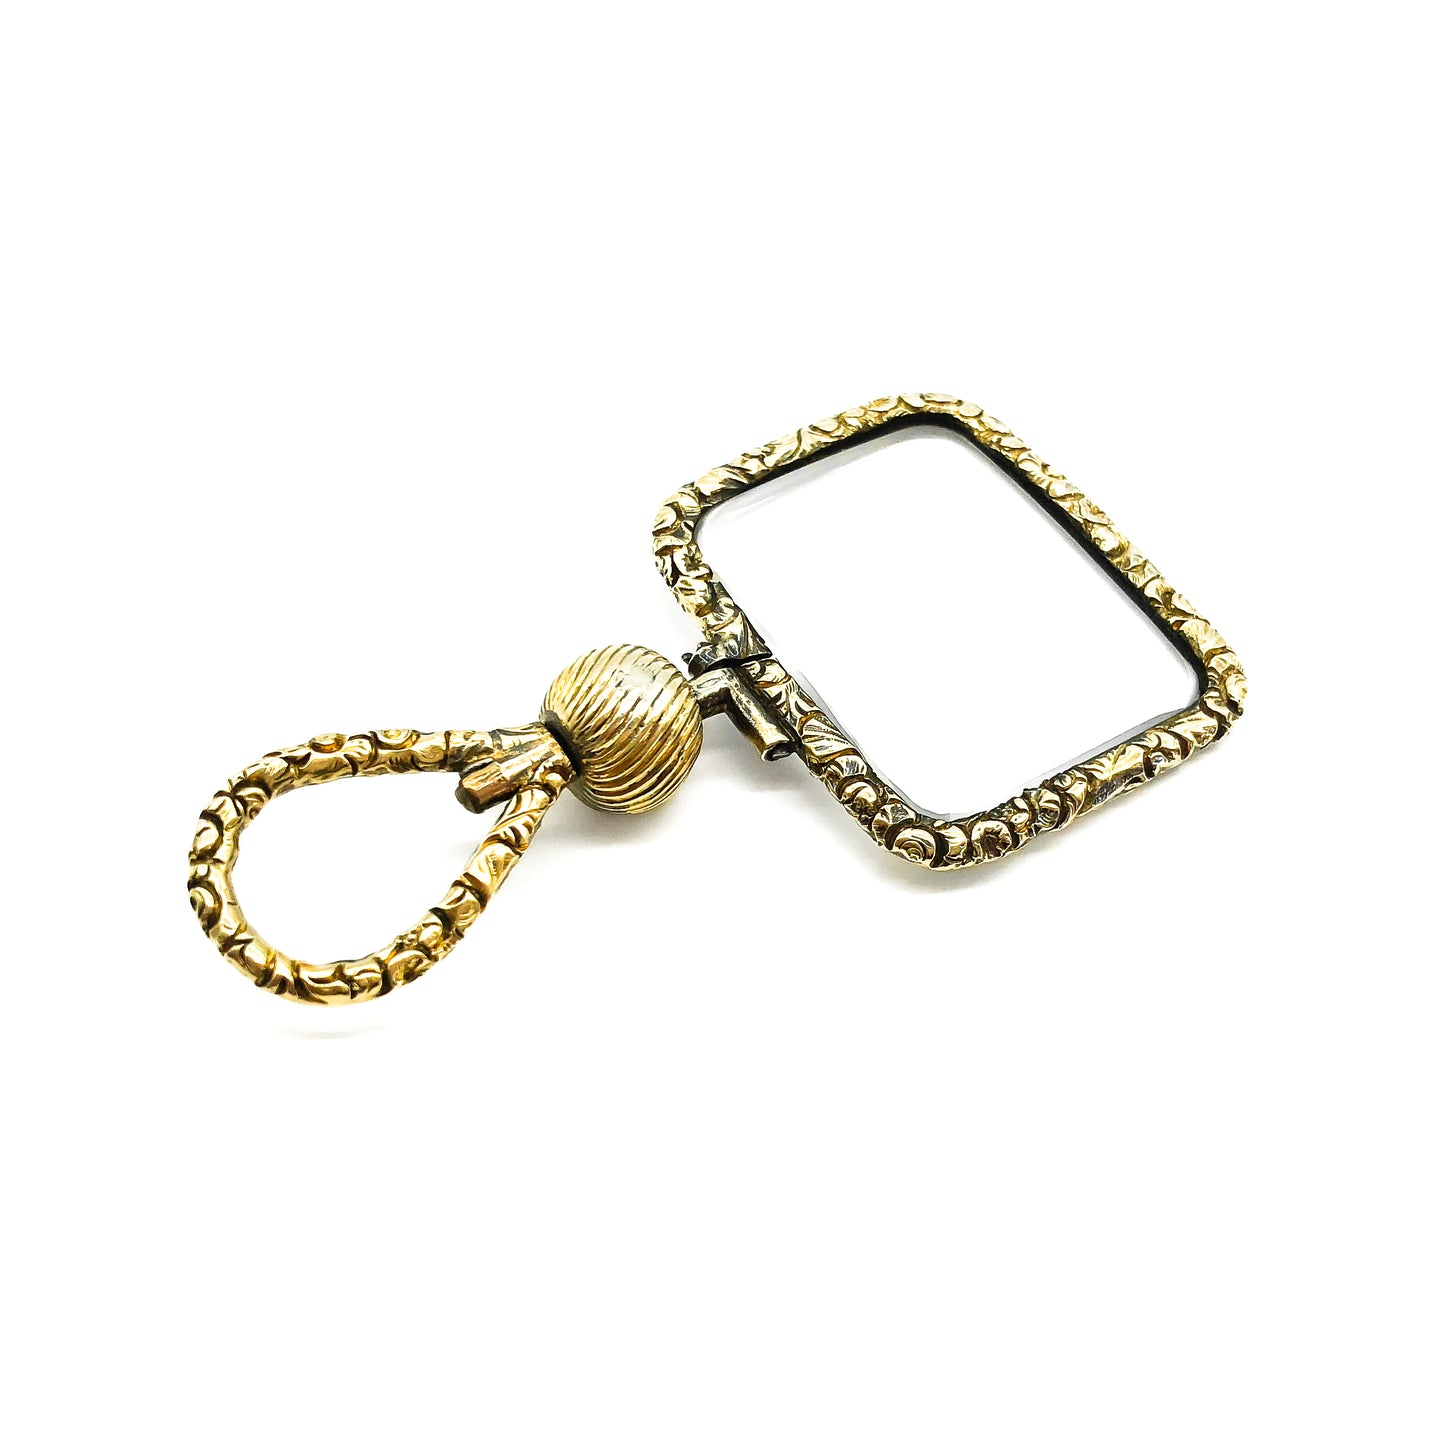 Beautifully engraved Victorian gold plated lorgnette which can be worn as a pendant.